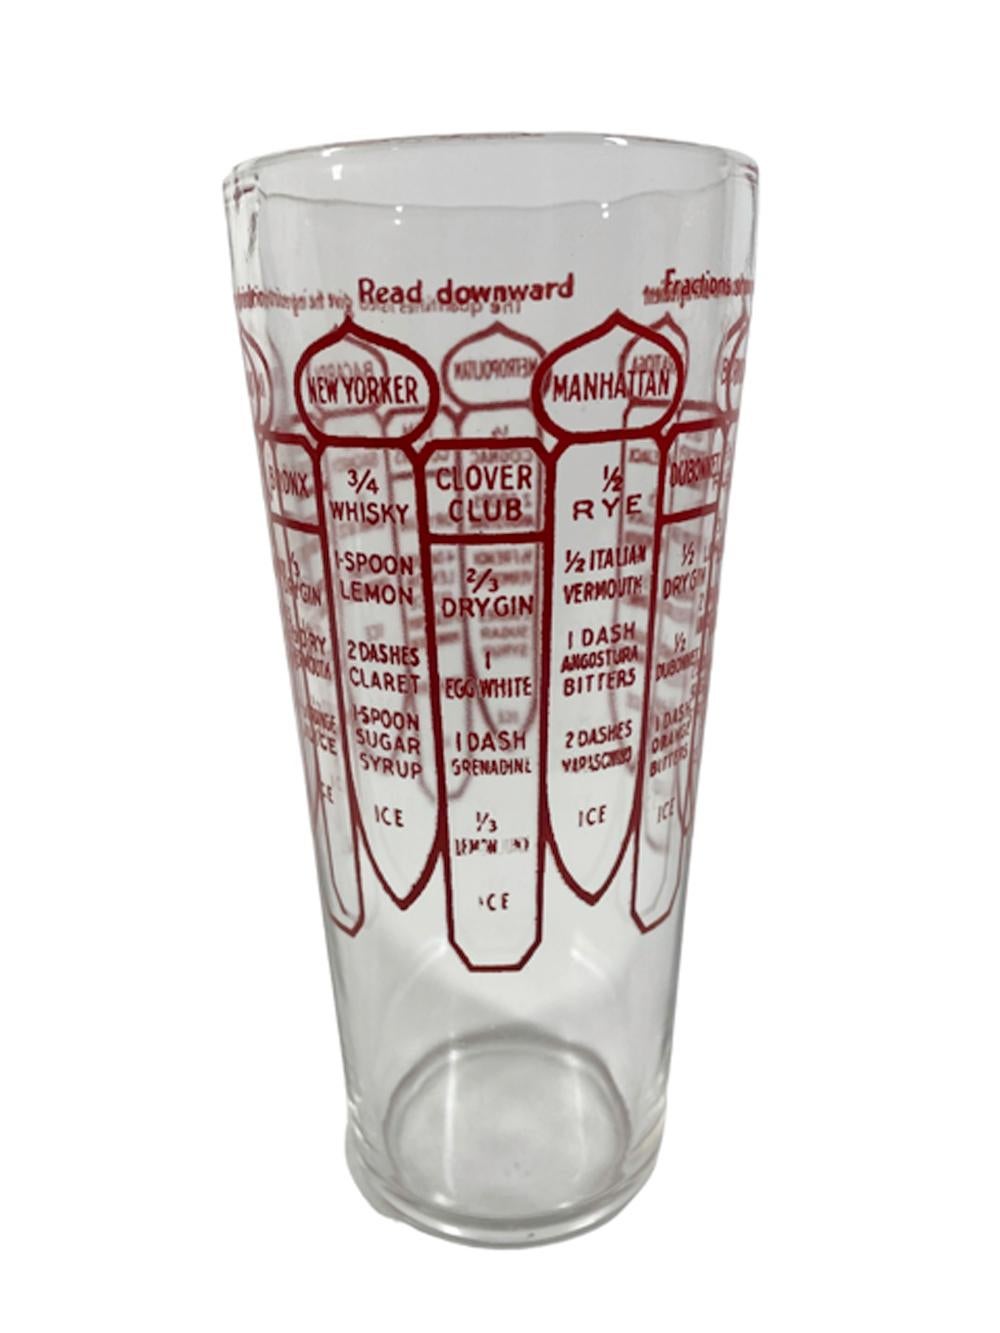 Art Deco cocktail shaker in tapered clear glass with red graphics showing recipes for 13 cocktails including fill lines and techniques for mixing. Topped with a stepped chrome domed lid with integral pour-spout and strainer.